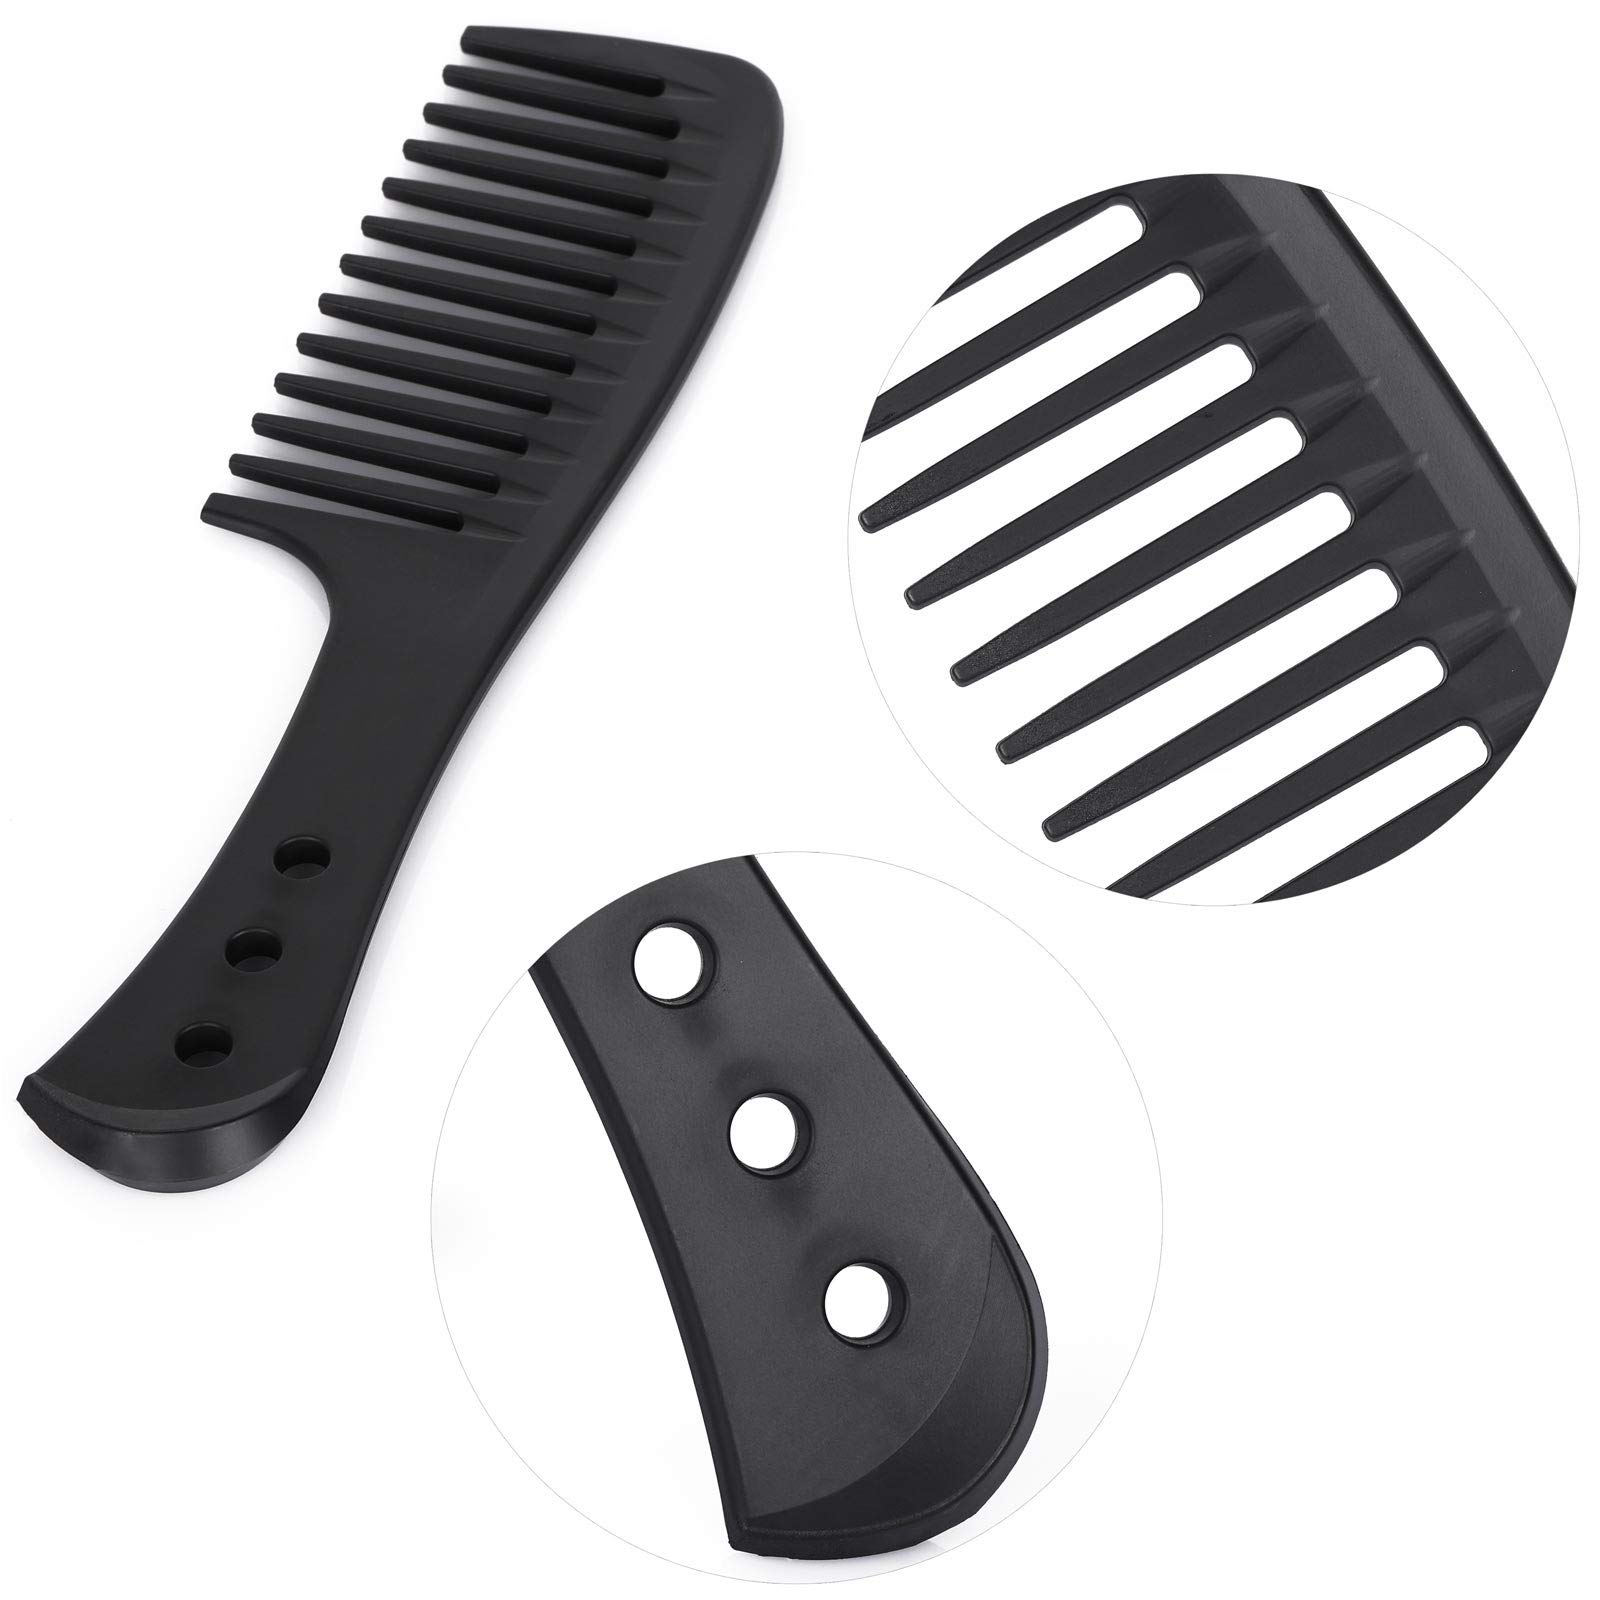 5 Pcs Wide Tooth Hair Combs - Fiber Carbon Combs Detangling Comb Styling Paddle Comb for Men Women Wet Curly/Thick Hair